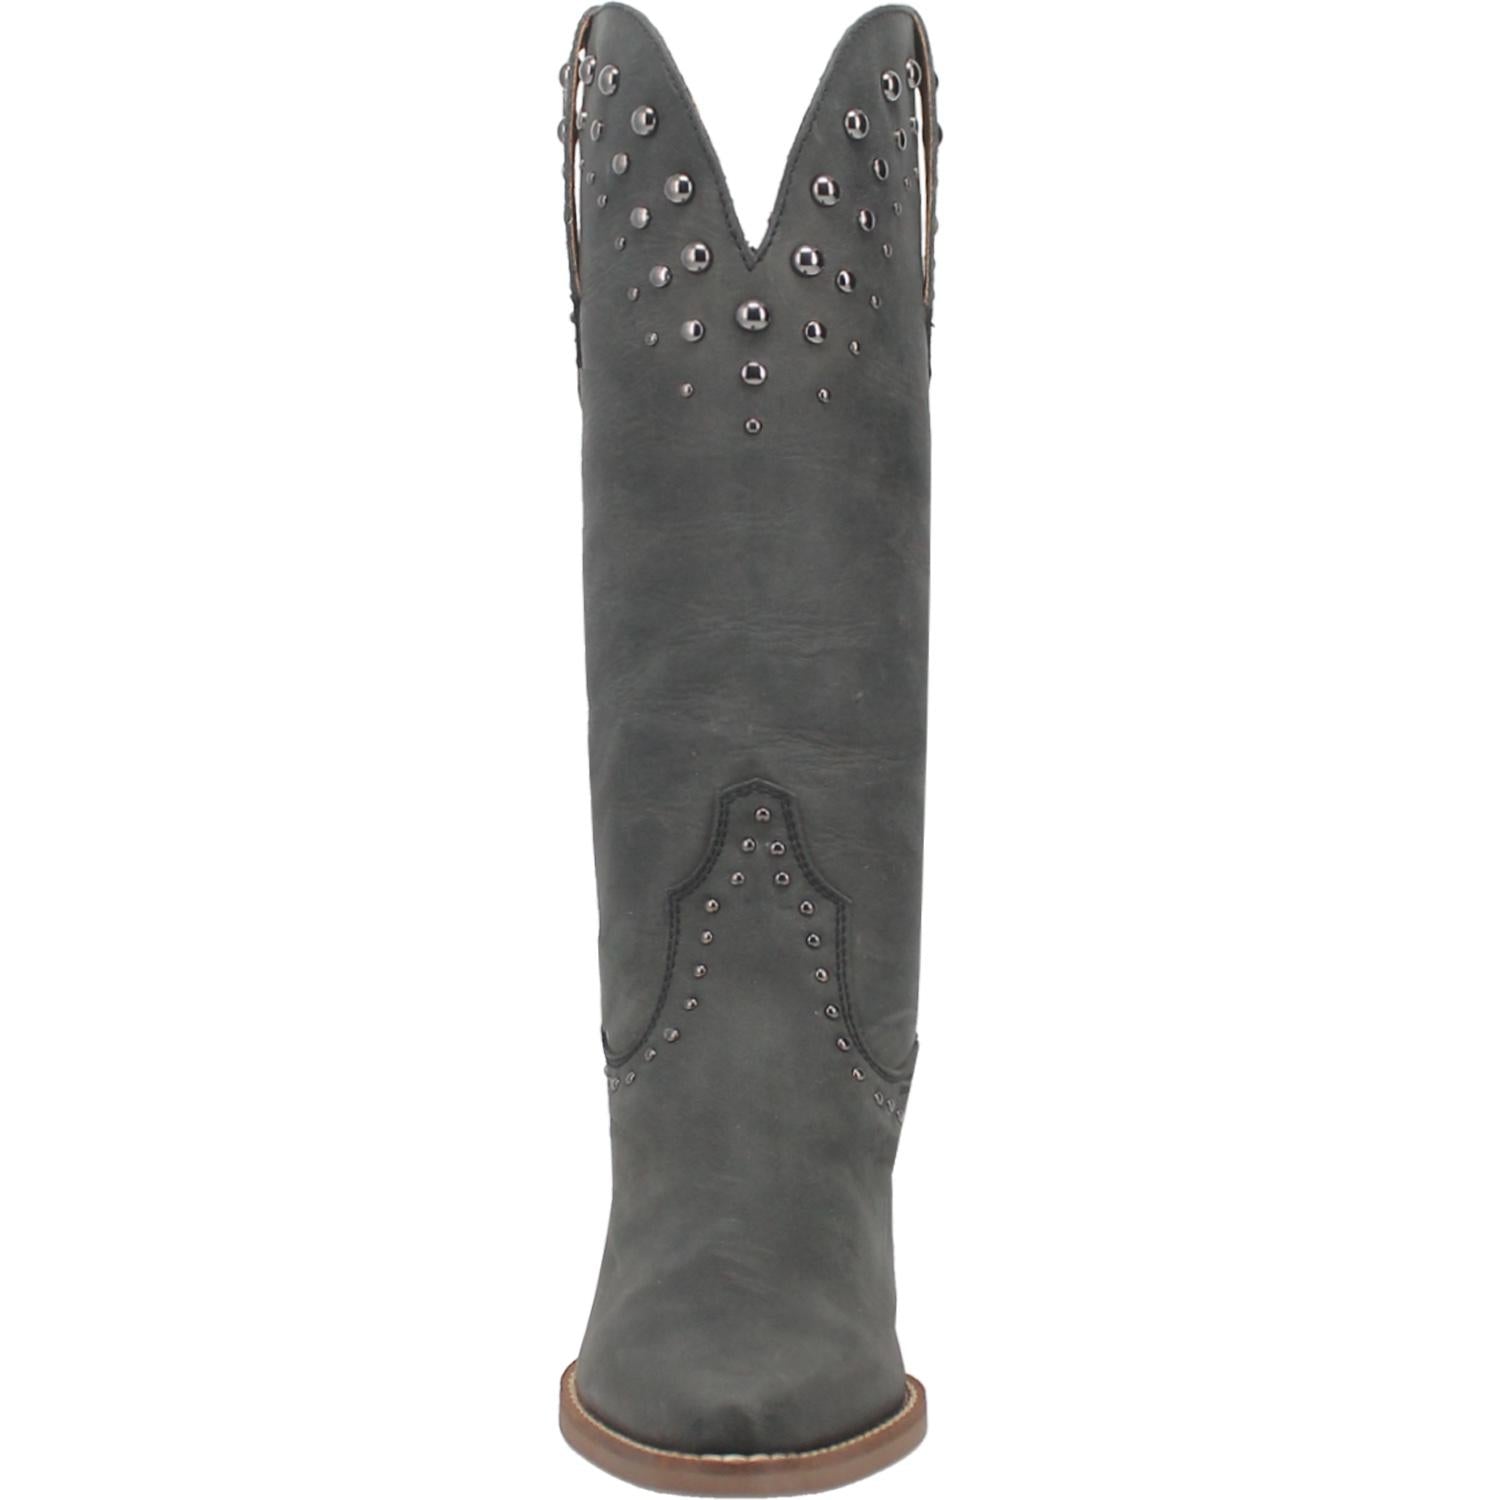 Black mid calf matte leather boots. Features silver stud designs on the top and middle of the boot, short heel, black straps, V line cut at the top, and white stitching. Item is pictured on a plain white background